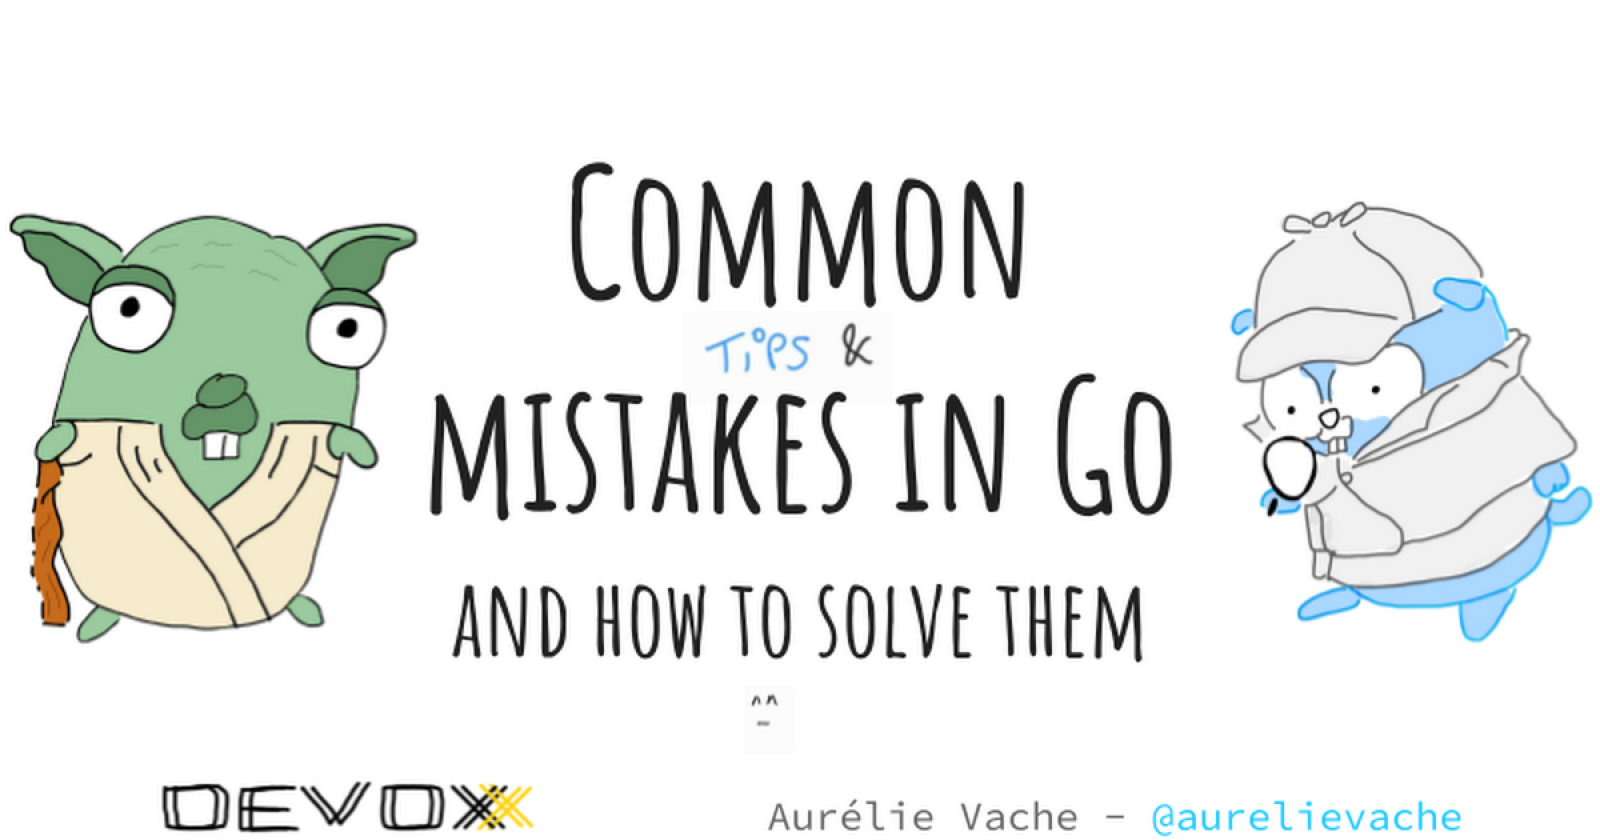 Common tips & mistakes in Go and how to solve them